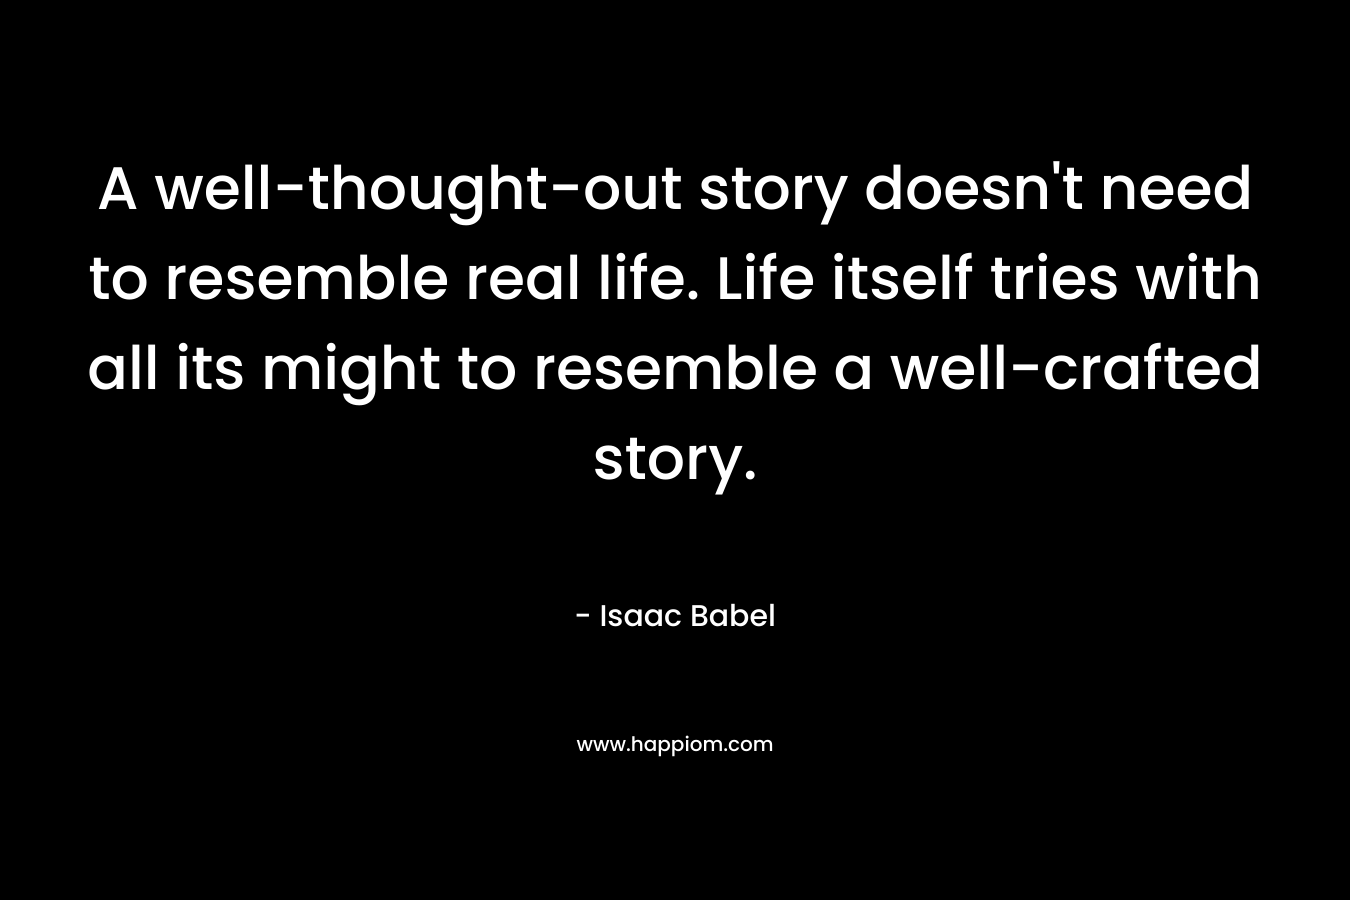 A well-thought-out story doesn’t need to resemble real life. Life itself tries with all its might to resemble a well-crafted story. – Isaac Babel